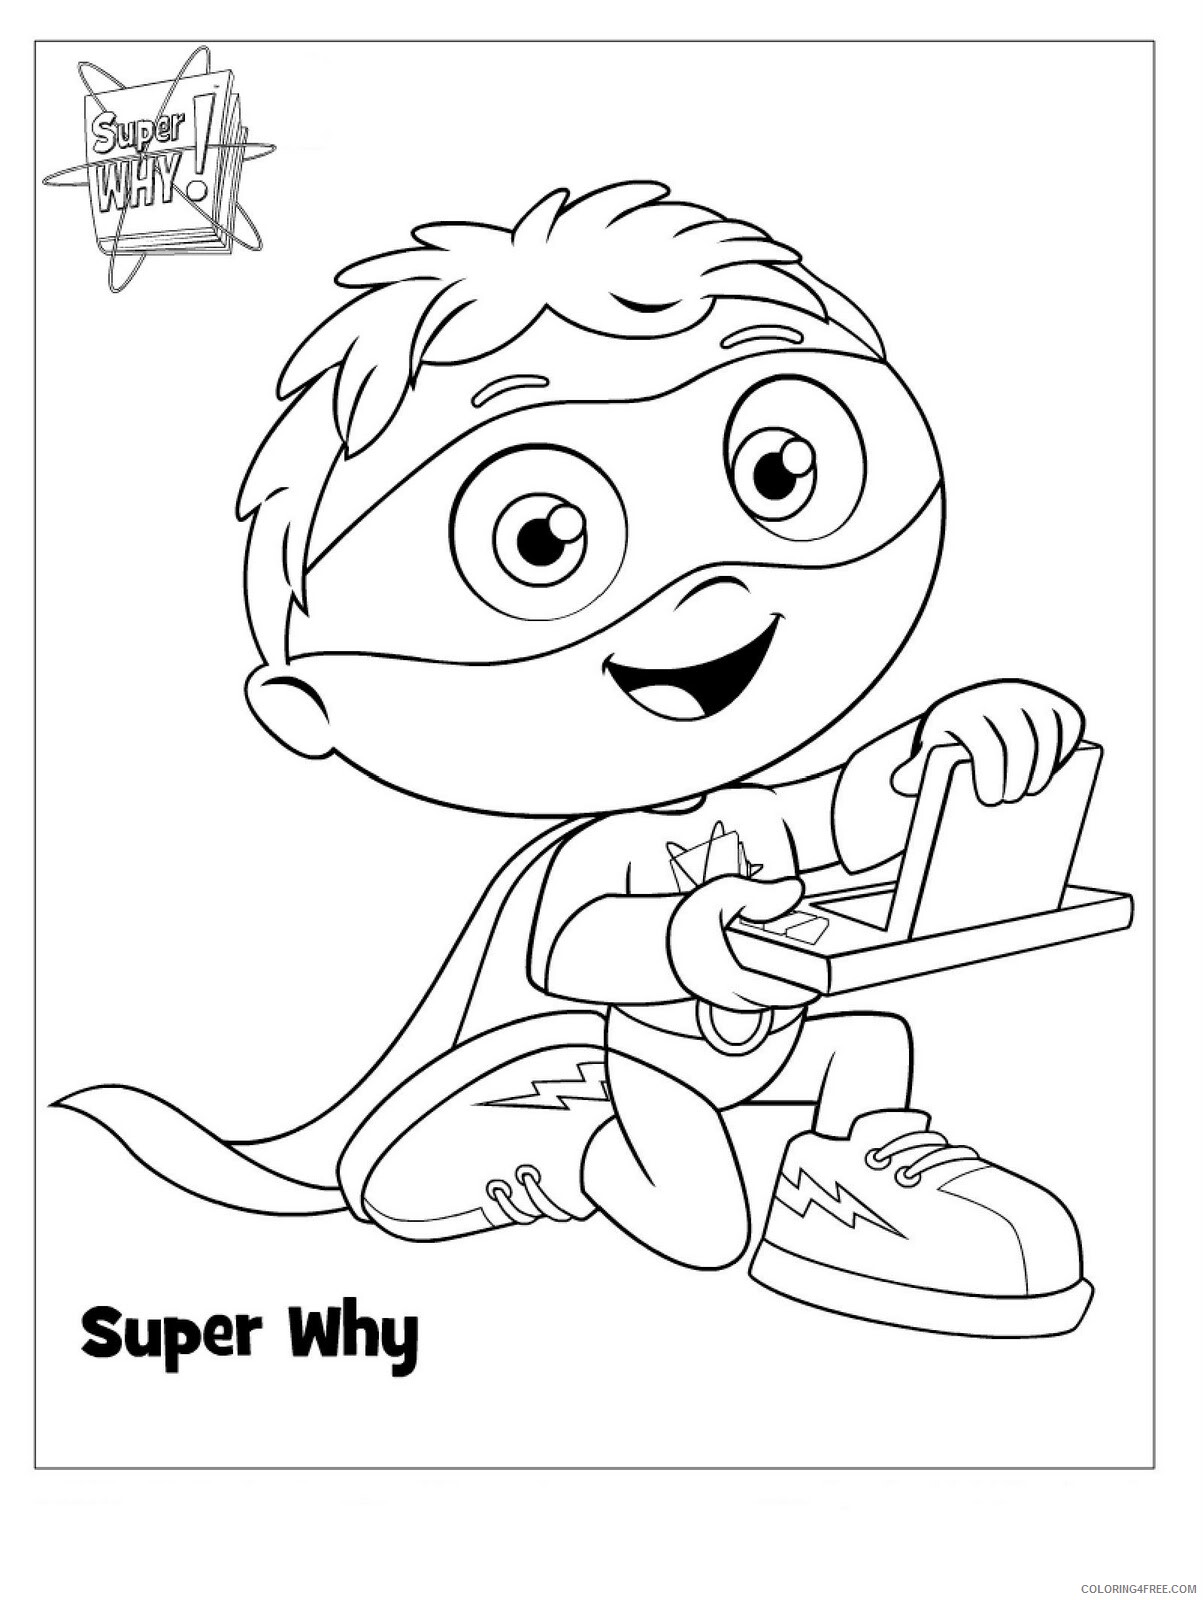 Super Why Coloring Pages TV Film Super Why Printable 2020 08313 Coloring4free